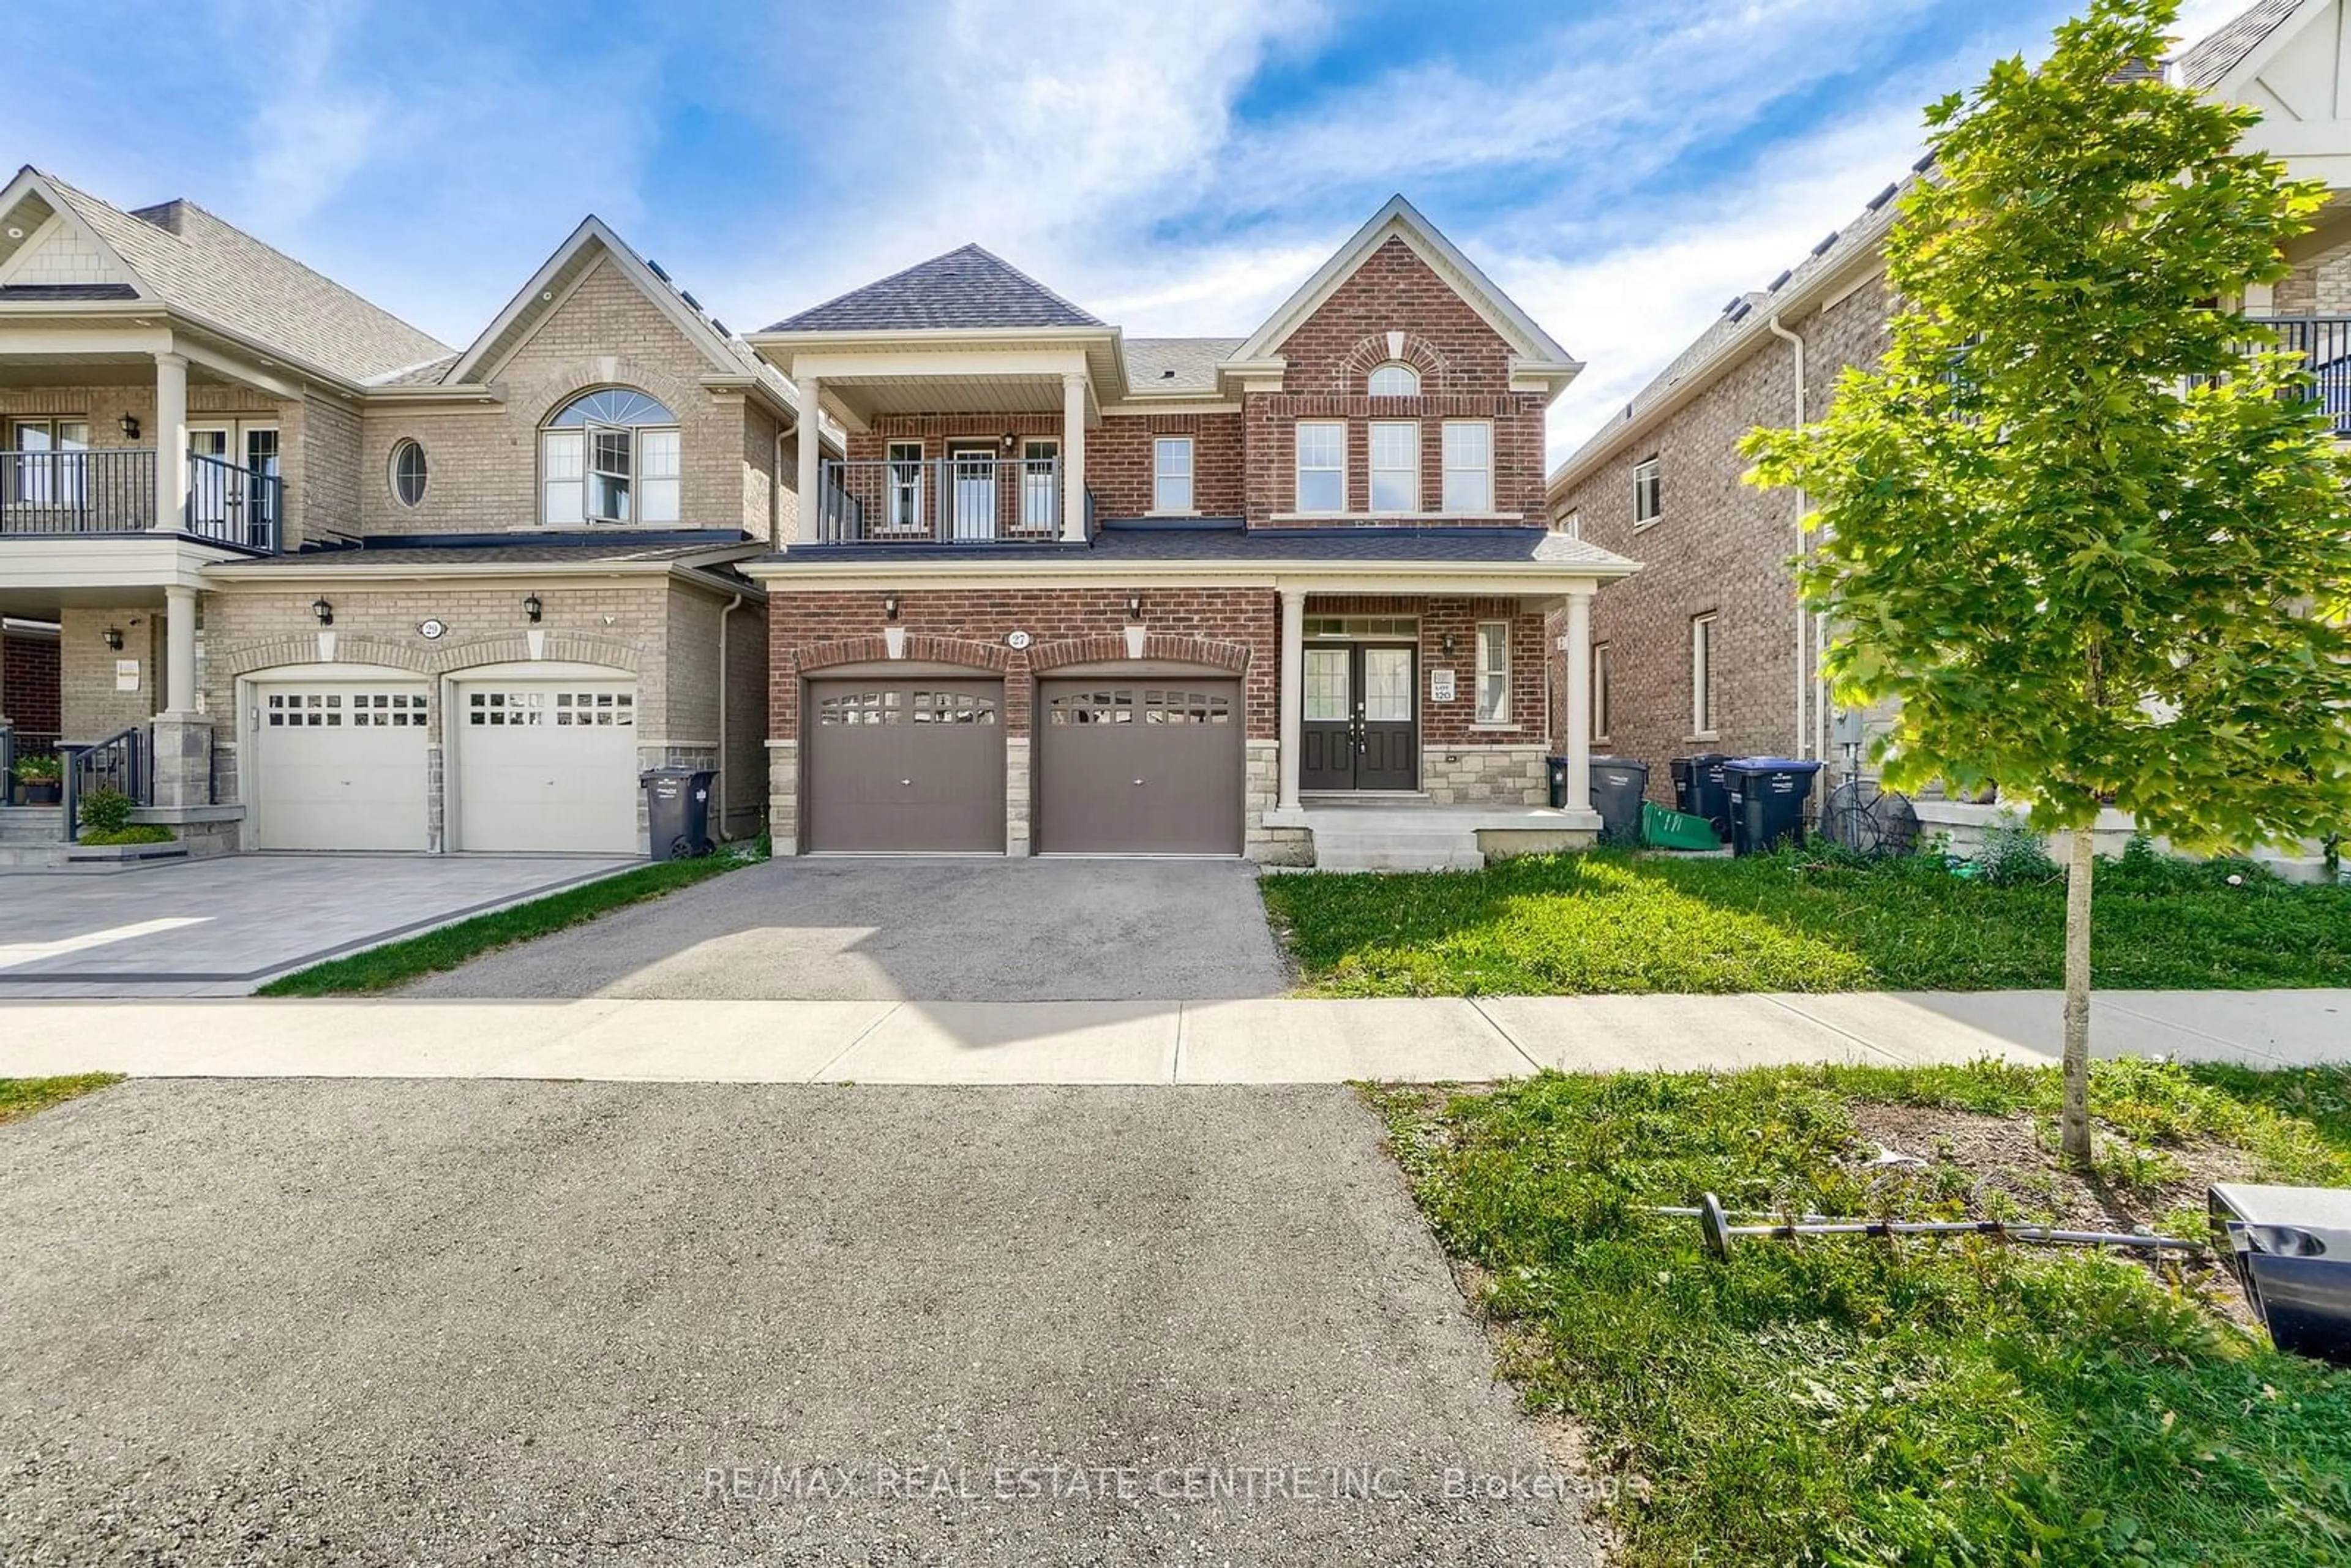 Frontside or backside of a home for 27 Fulmer Rd, Brampton Ontario L7A 4L9